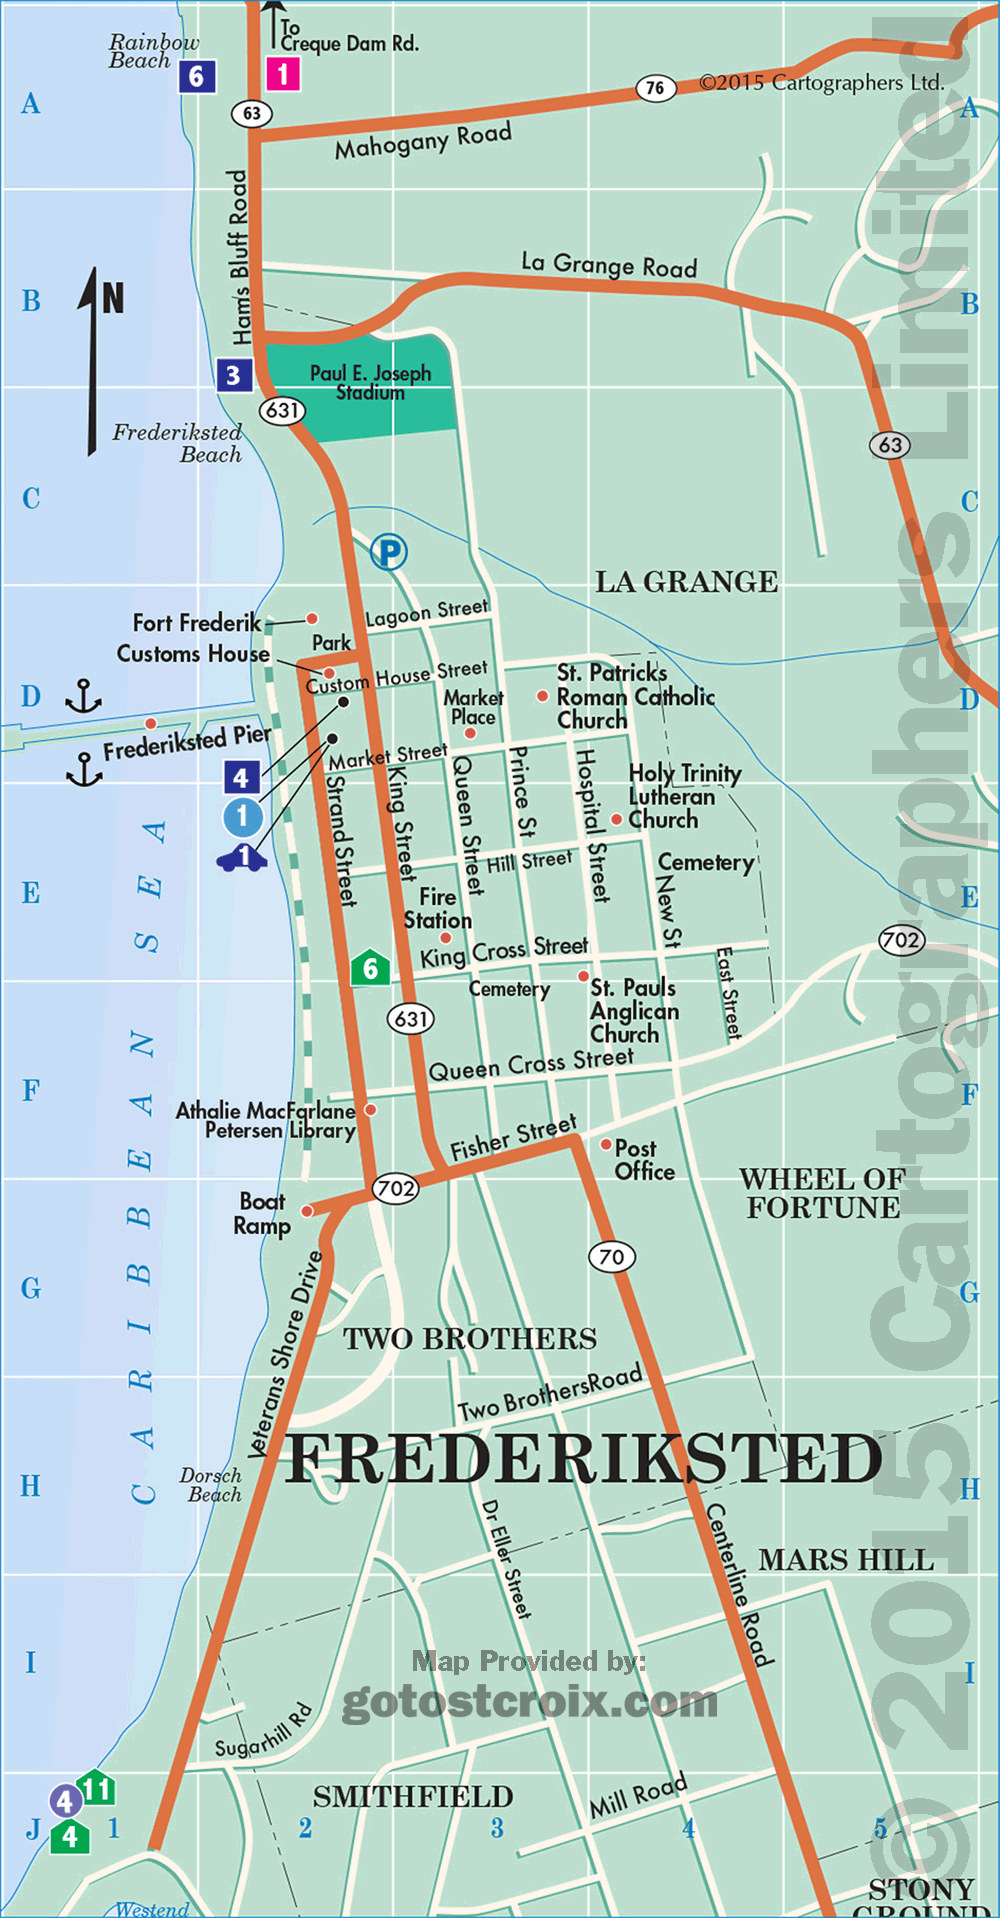 Plan Your Travel, Island Maps Of St. Croix | Gotostcroix - Printable Map Of St Croix